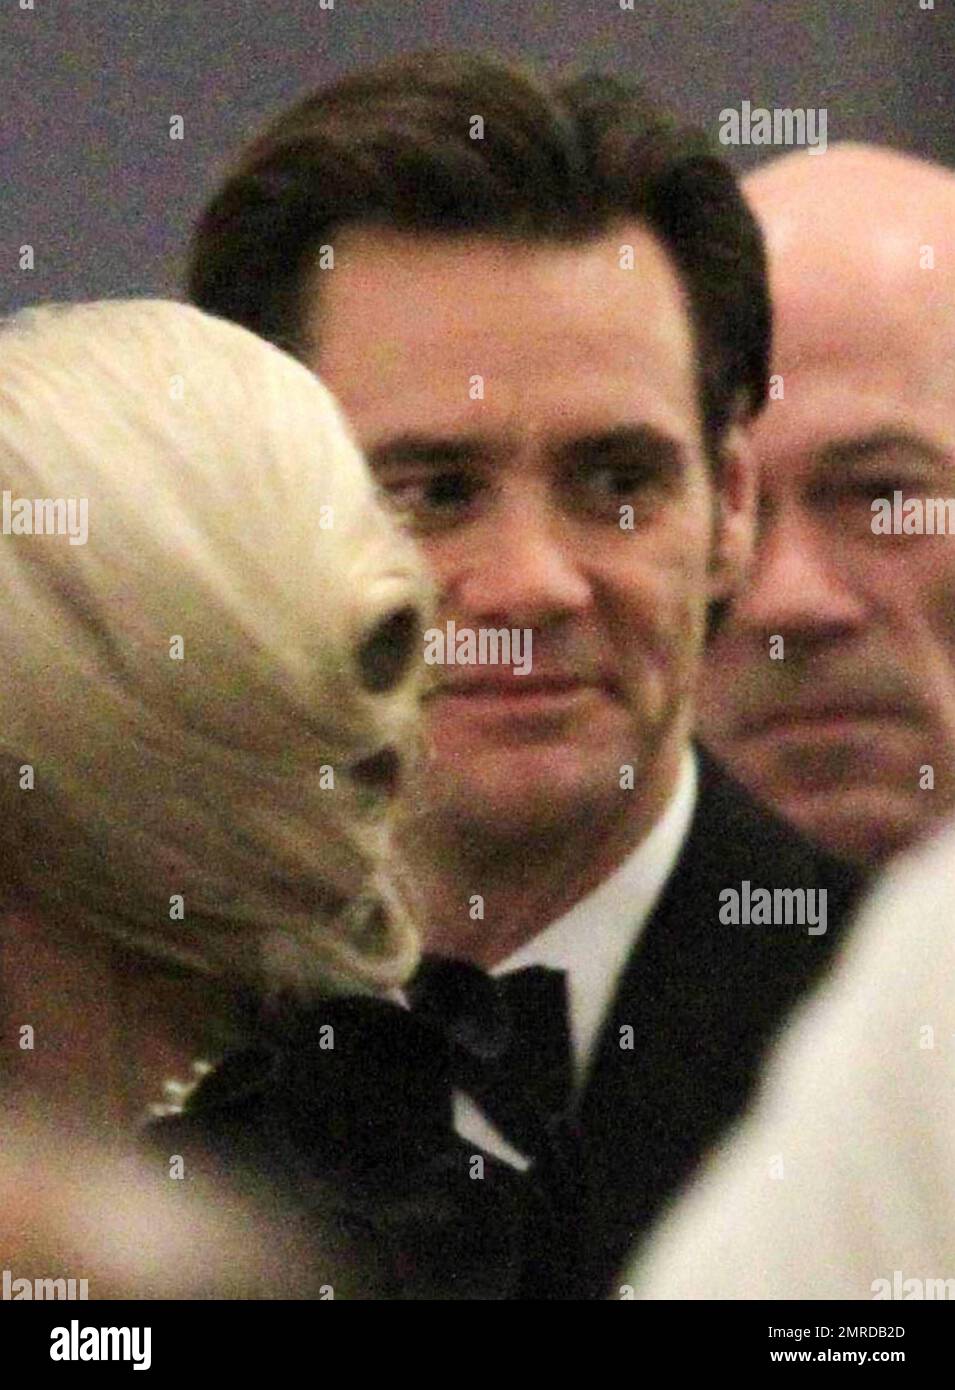 EXCLUSIVE!! Jim Carrey pulls some funny faces as he films a dancing scene  with Angela Lansbury on the set of 